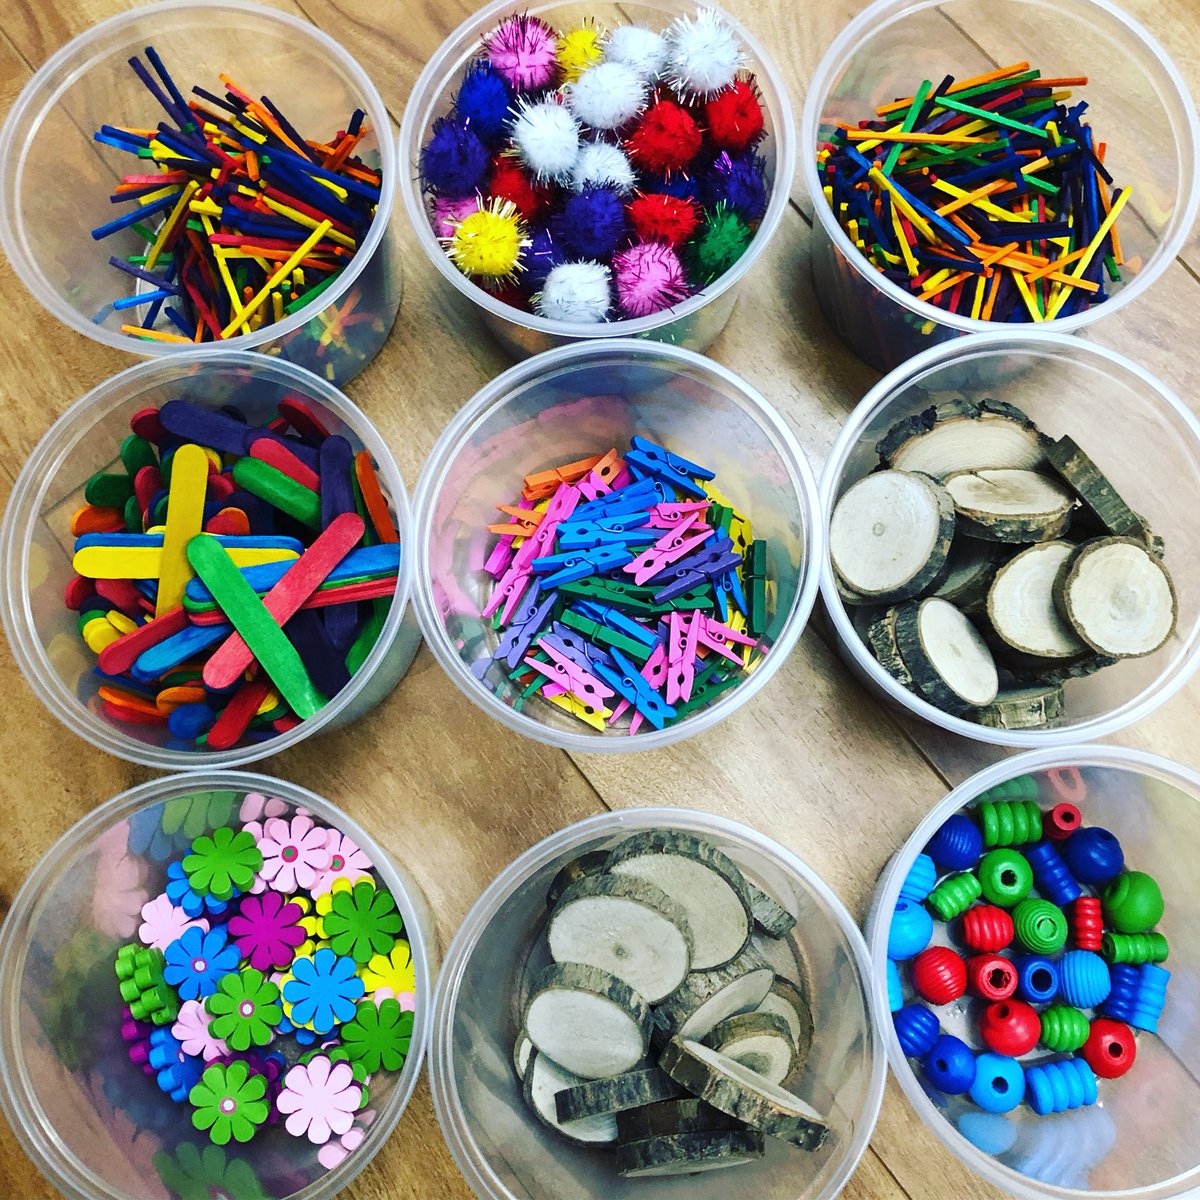 Jennifer Mason ECE on X: I love getting new loose parts! I cannot wait to  see how the children will use these materials in their play. What is your  favourite loose part